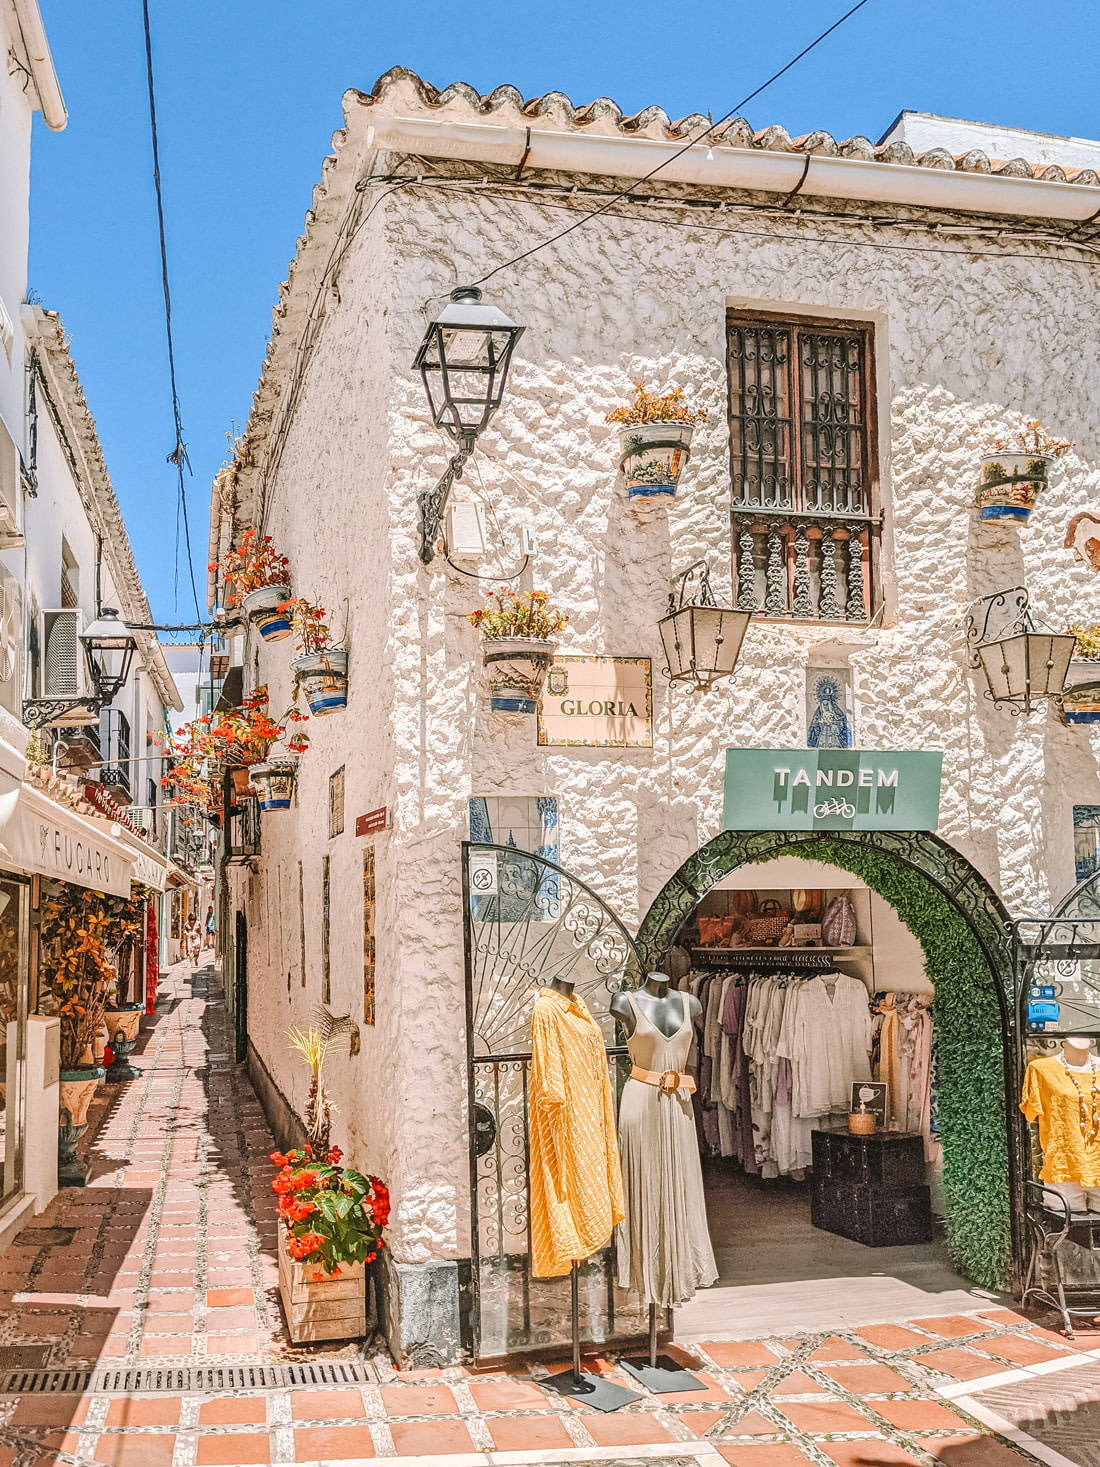 The Marbella shopping experience